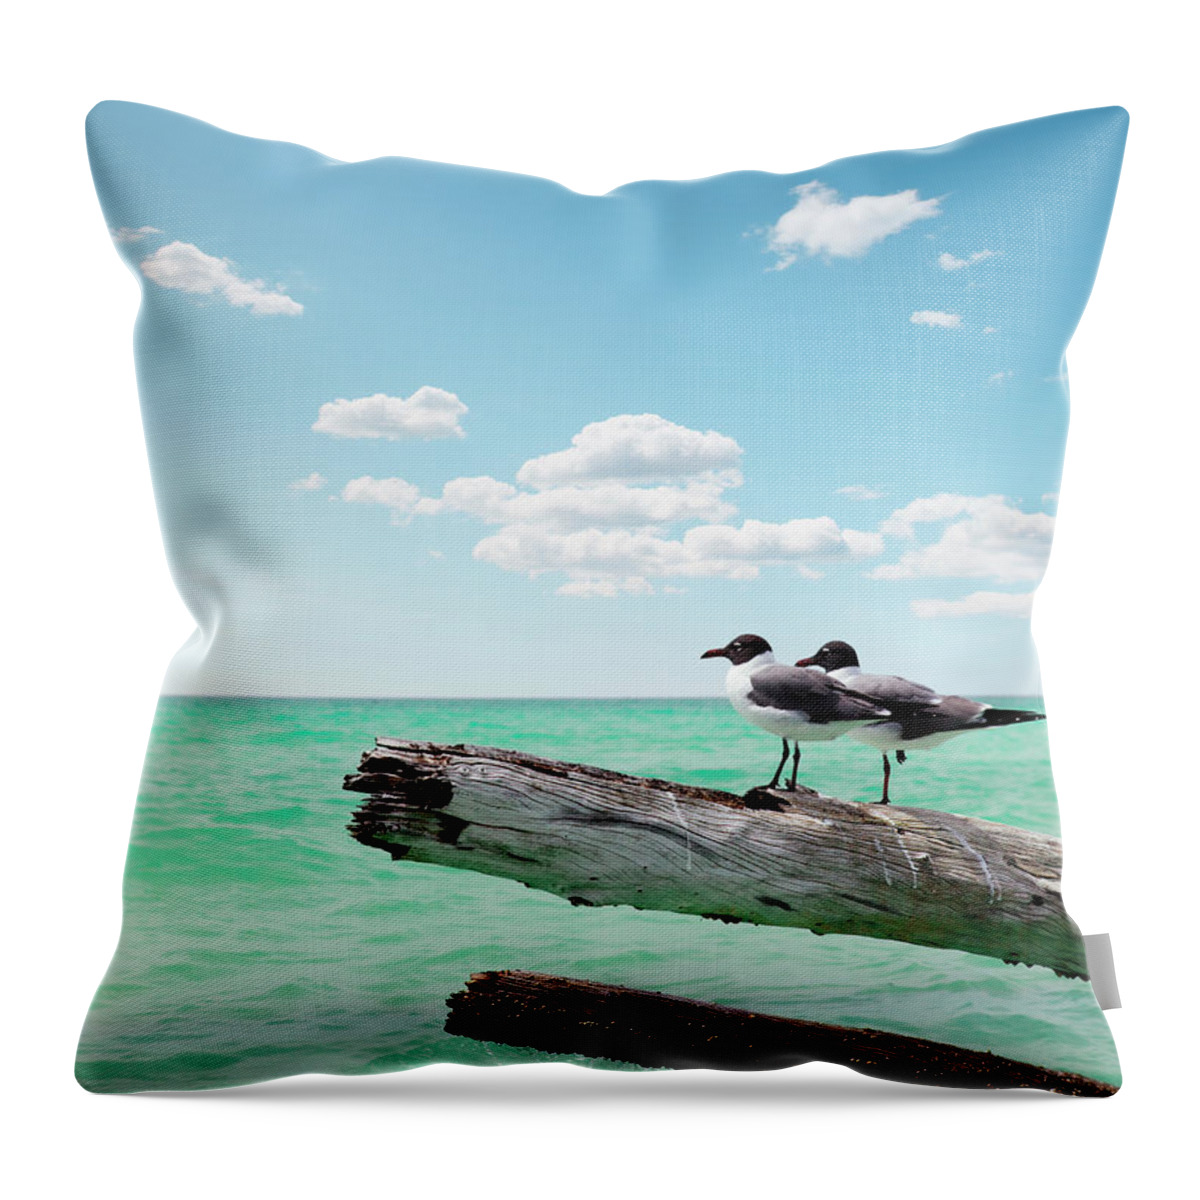 Seascape Throw Pillow featuring the photograph Two Seagulls Sitting On Dead Trees by Chaos